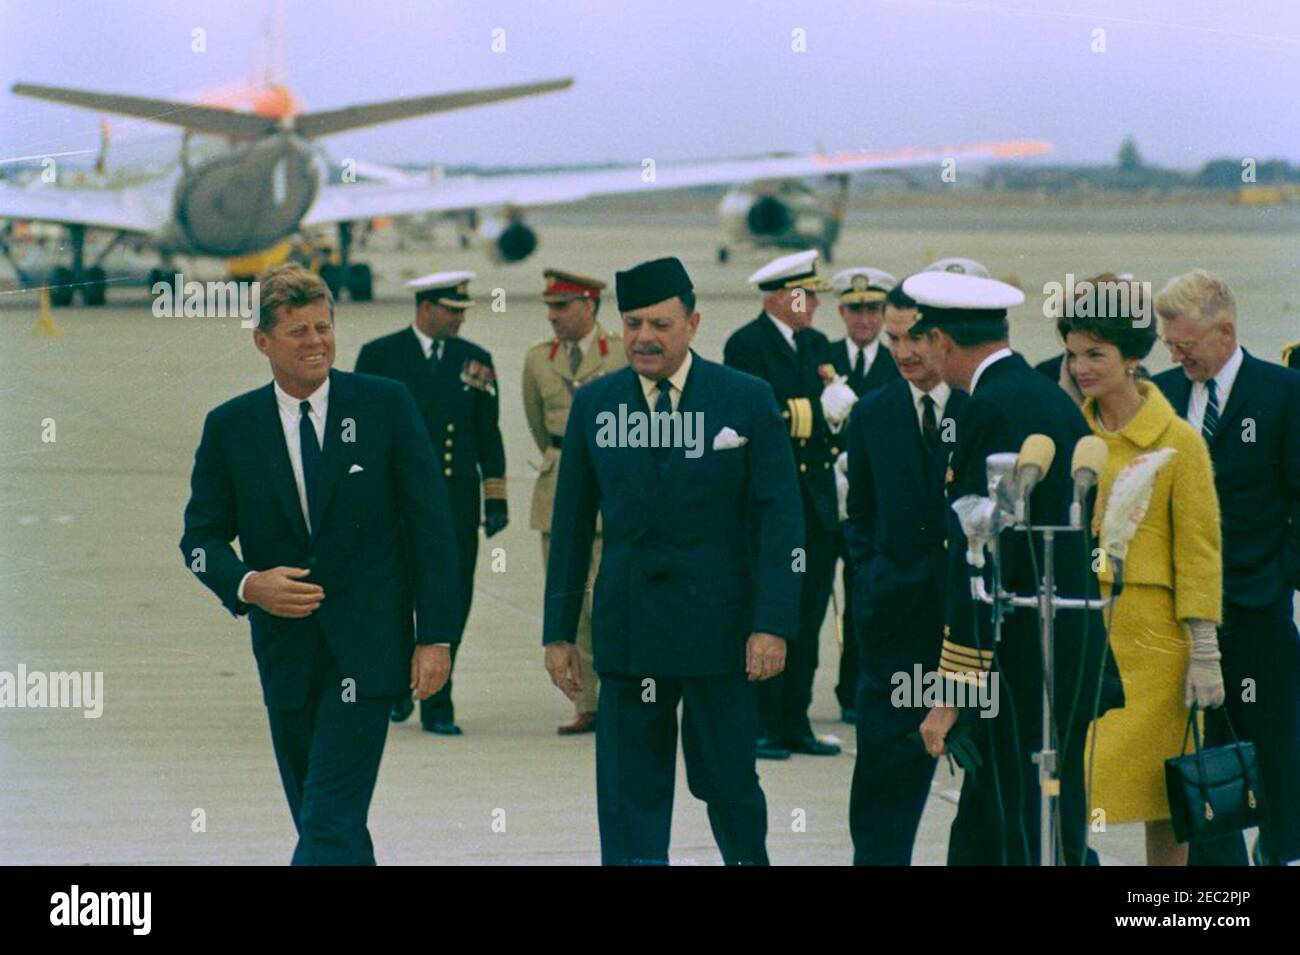 Visit of Muhammad Ayub Khan, President of Pakistan, Newport, Rhode Island. President John F. Kennedy and First Lady Jacqueline Kennedy walk with President of Pakistan, Muhammad Ayub Khan, following his arrival at Quonset Point Naval Air Station. Left to right (in foreground): President Kennedy; President Ayub Khan; U.S. Ambassador to Pakistan, Walter P. McConaughy; Naval Aide to President Kennedy, Captain Tazewell T. Shepard, Jr. (facing away); Mrs. Kennedy; U.S. Assistant Secretary of State for Near Eastern and South Asian Affairs, Phillips Talbot. North Kingstown, Rhode Island. [Scratches on Stock Photo